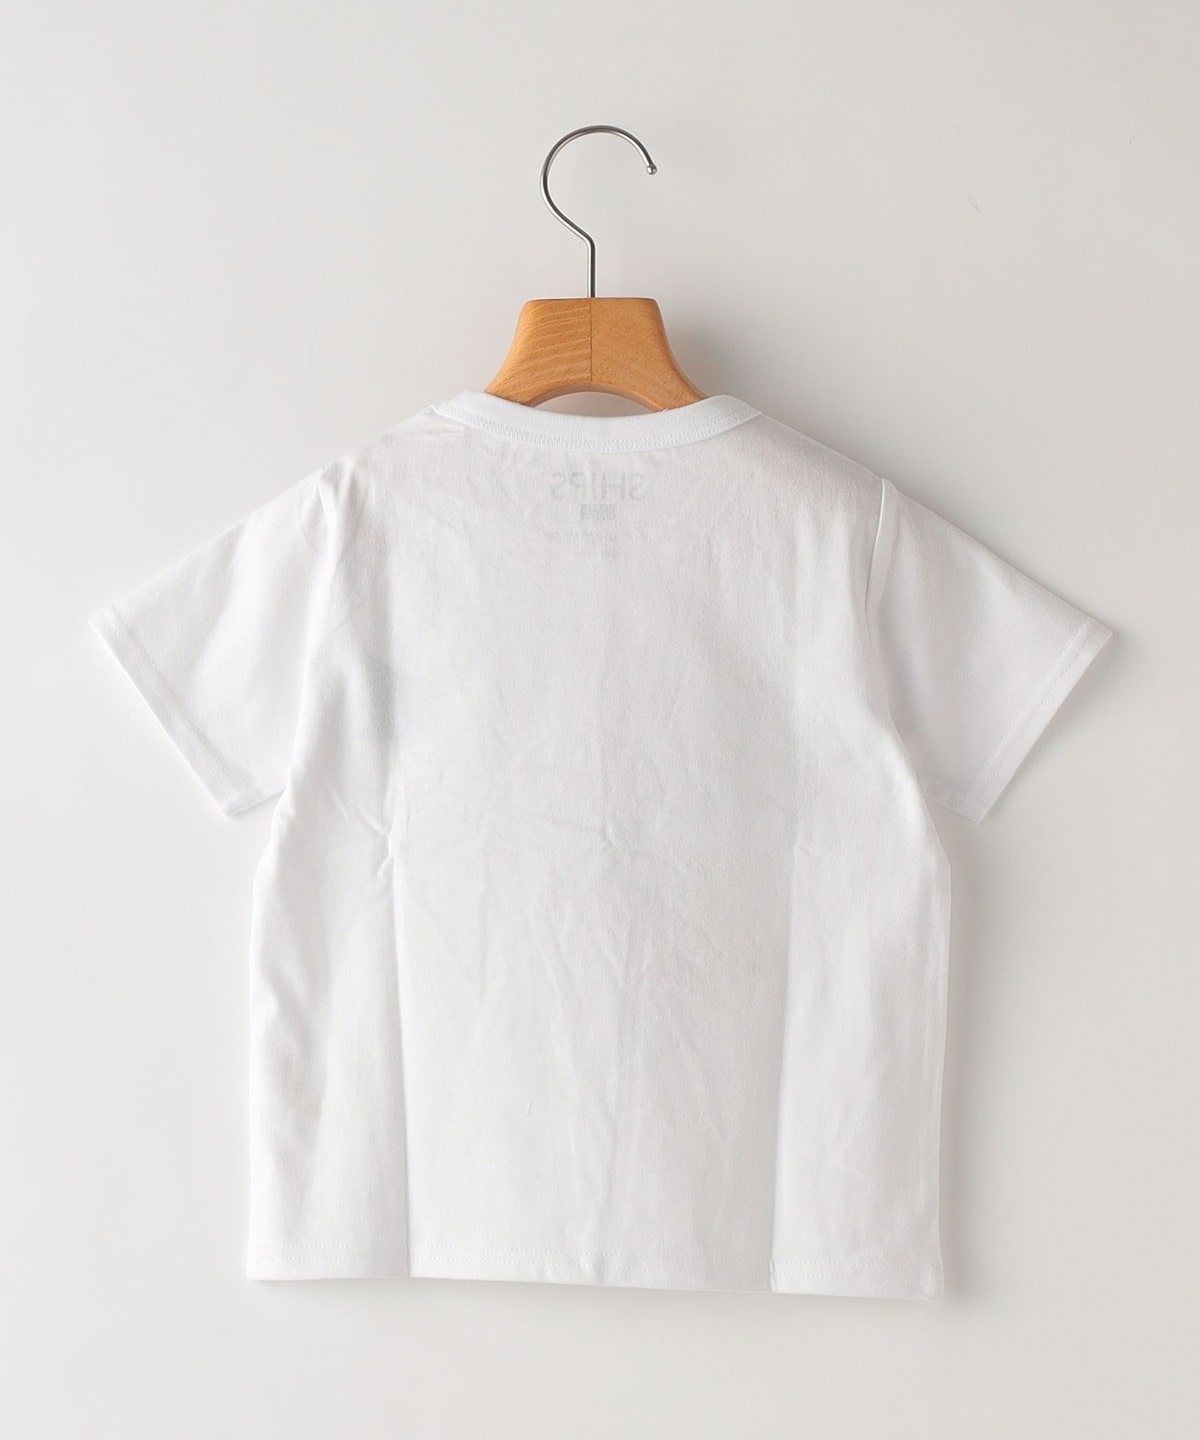 SHIPS Colors:〈洗濯機可能〉パッチワーク プリント TEE(80～130cm): T